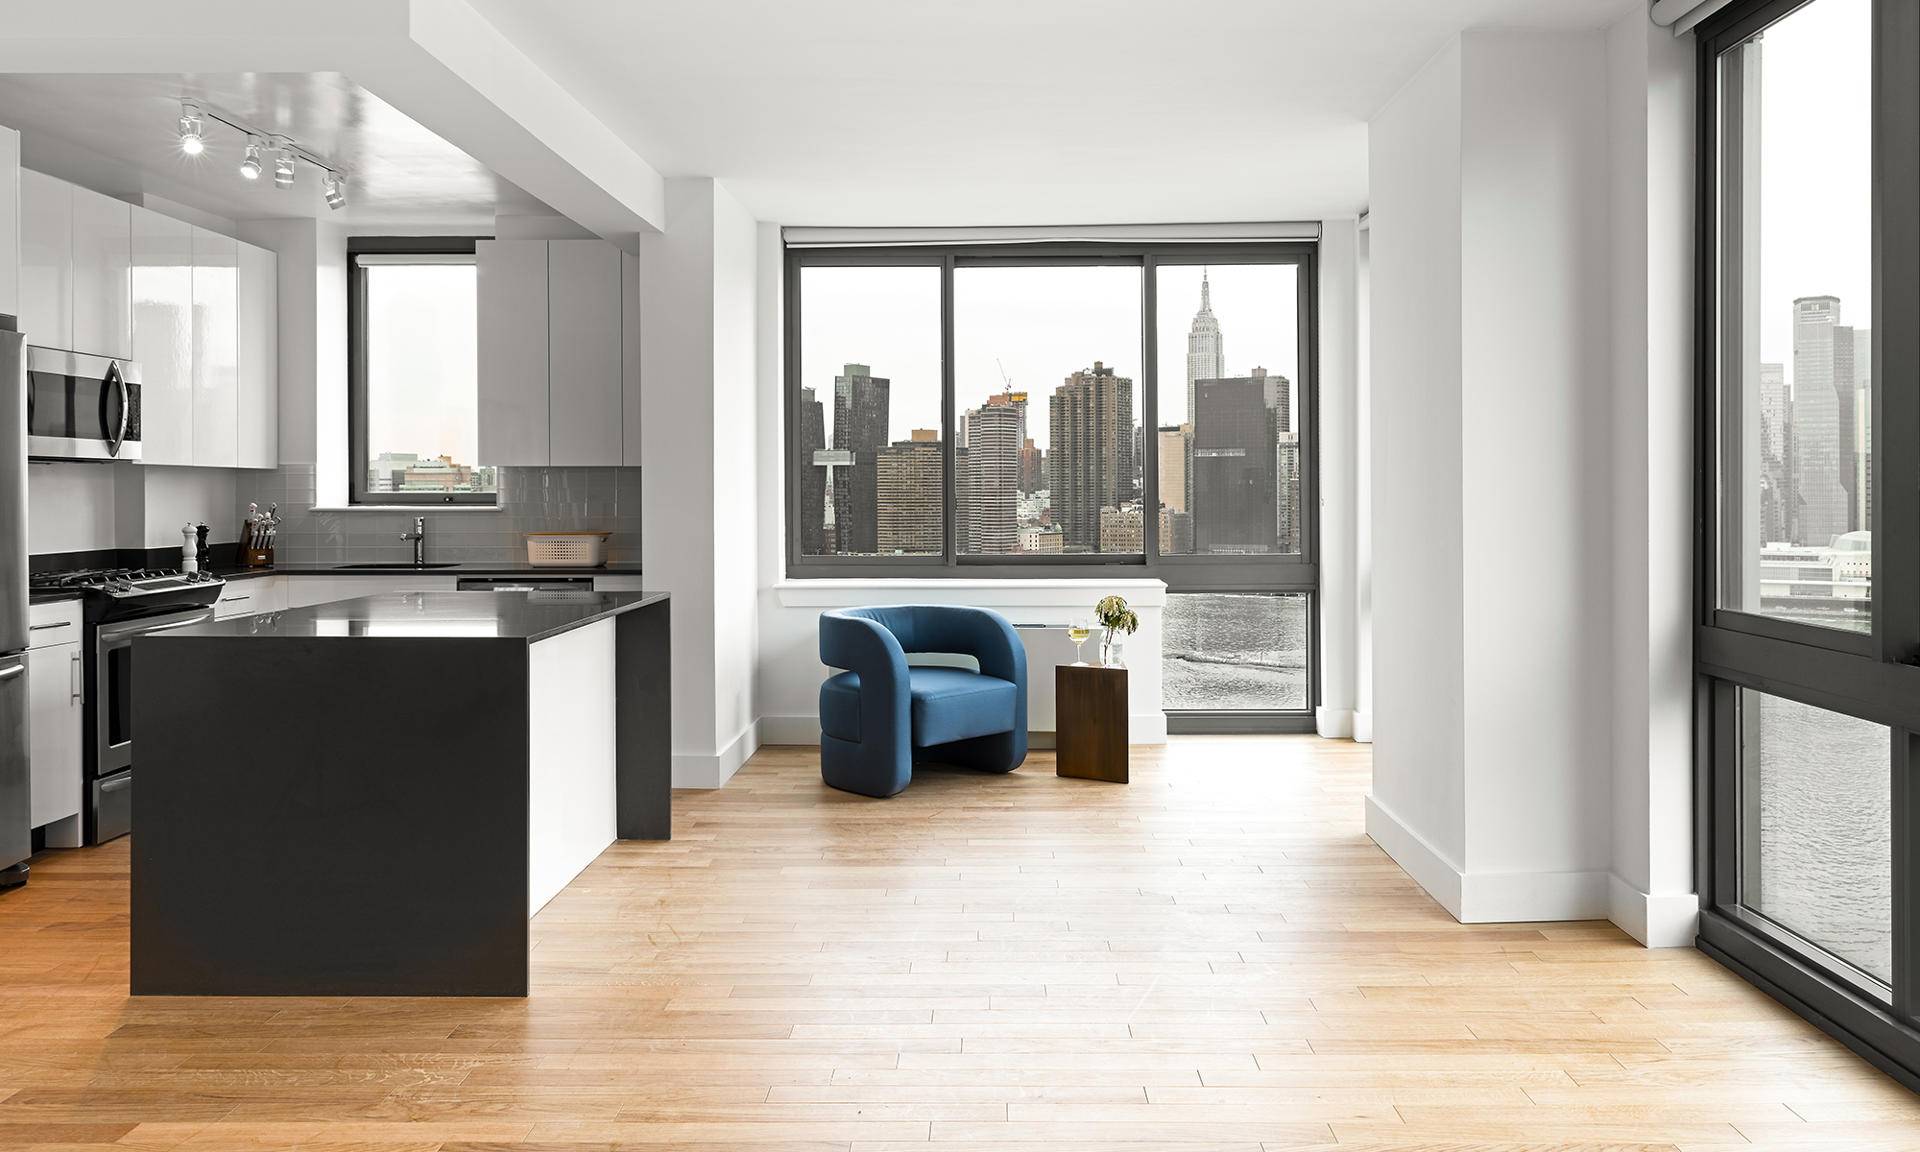 LIC Large Alcove Studio, with an Open Kitchen, Great Closet Space and East-facing Midtown Views.